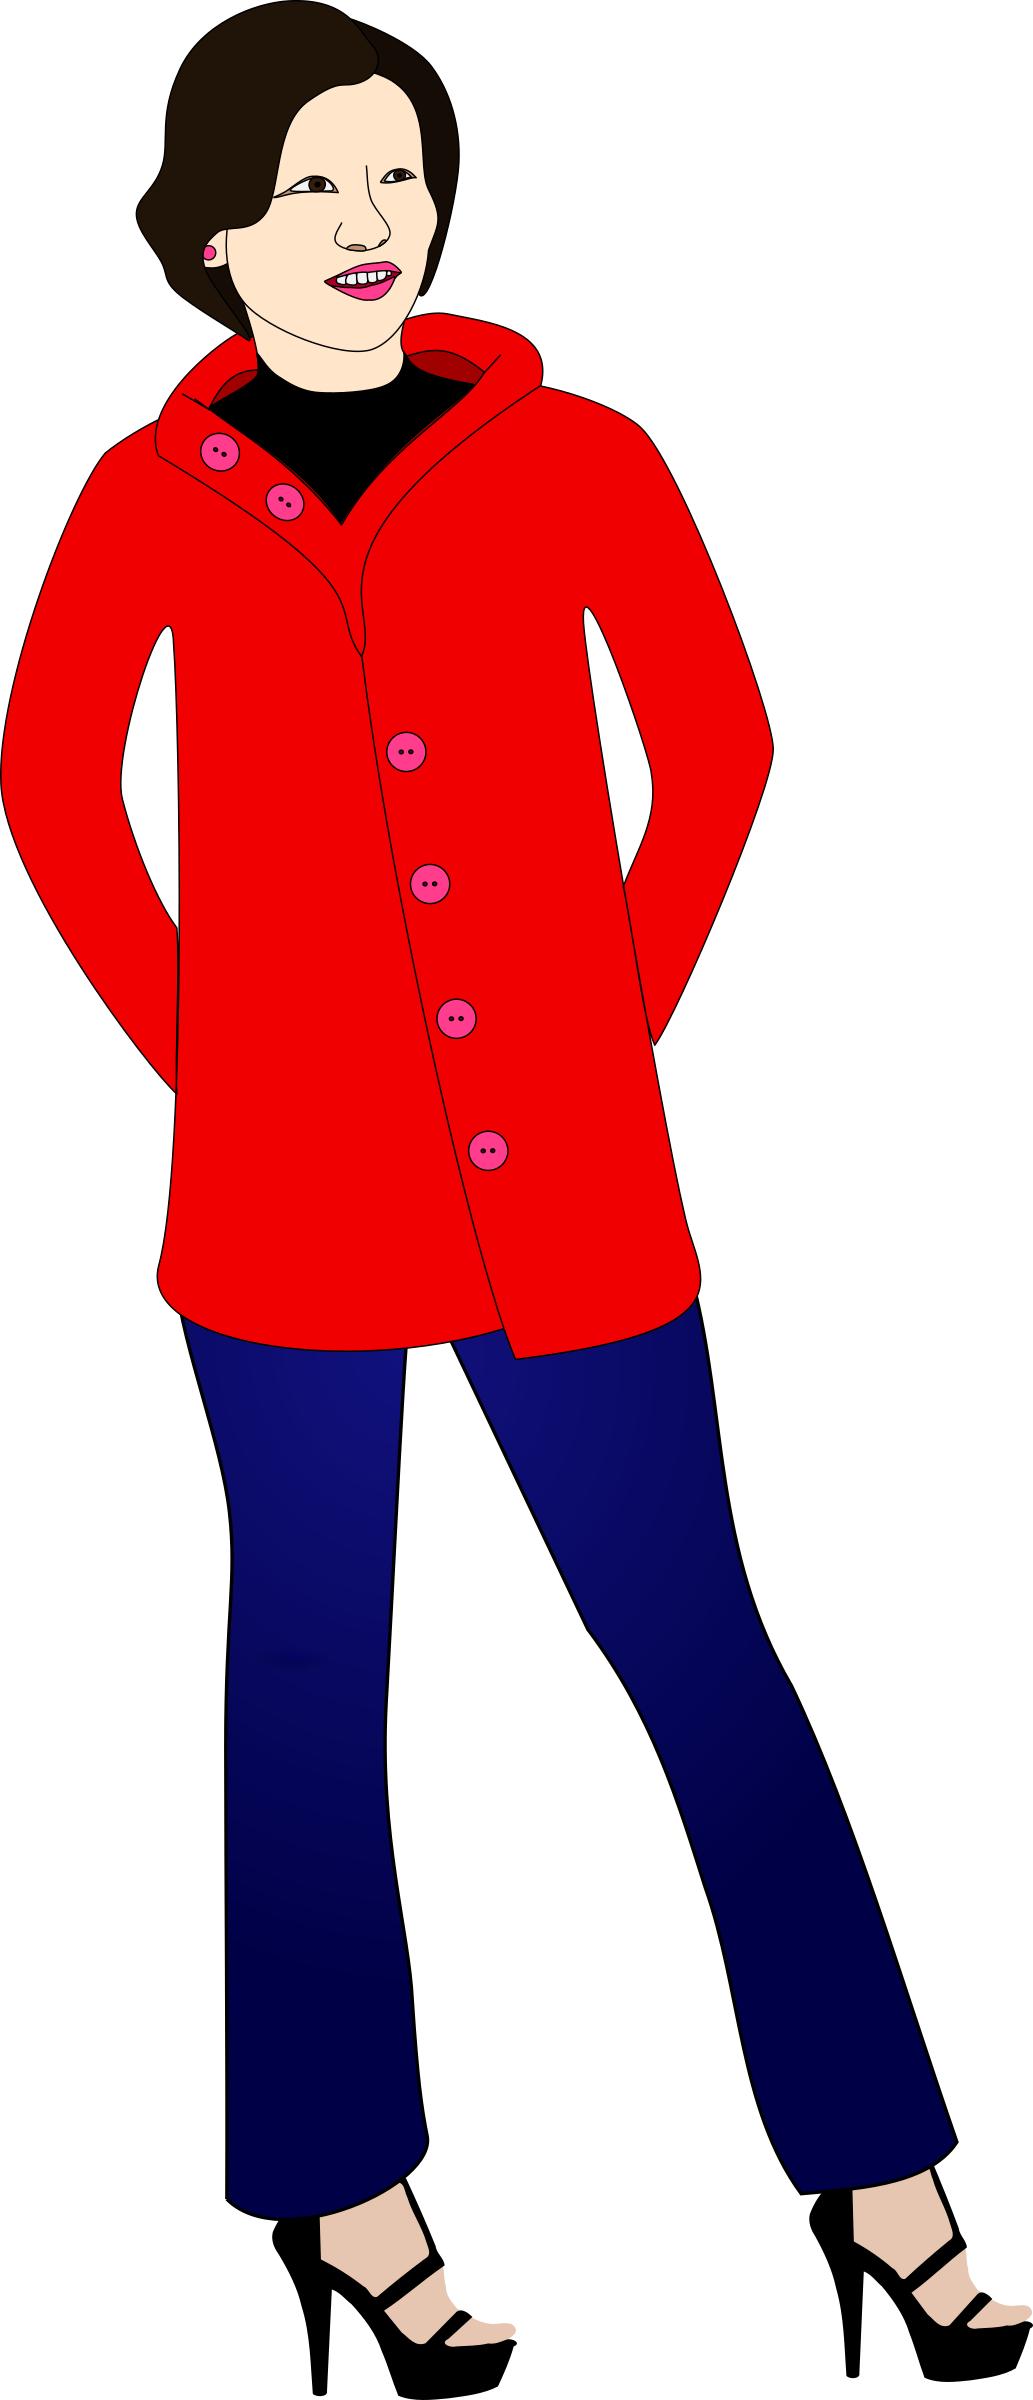 Woman in jeans, heels, and a red coat png